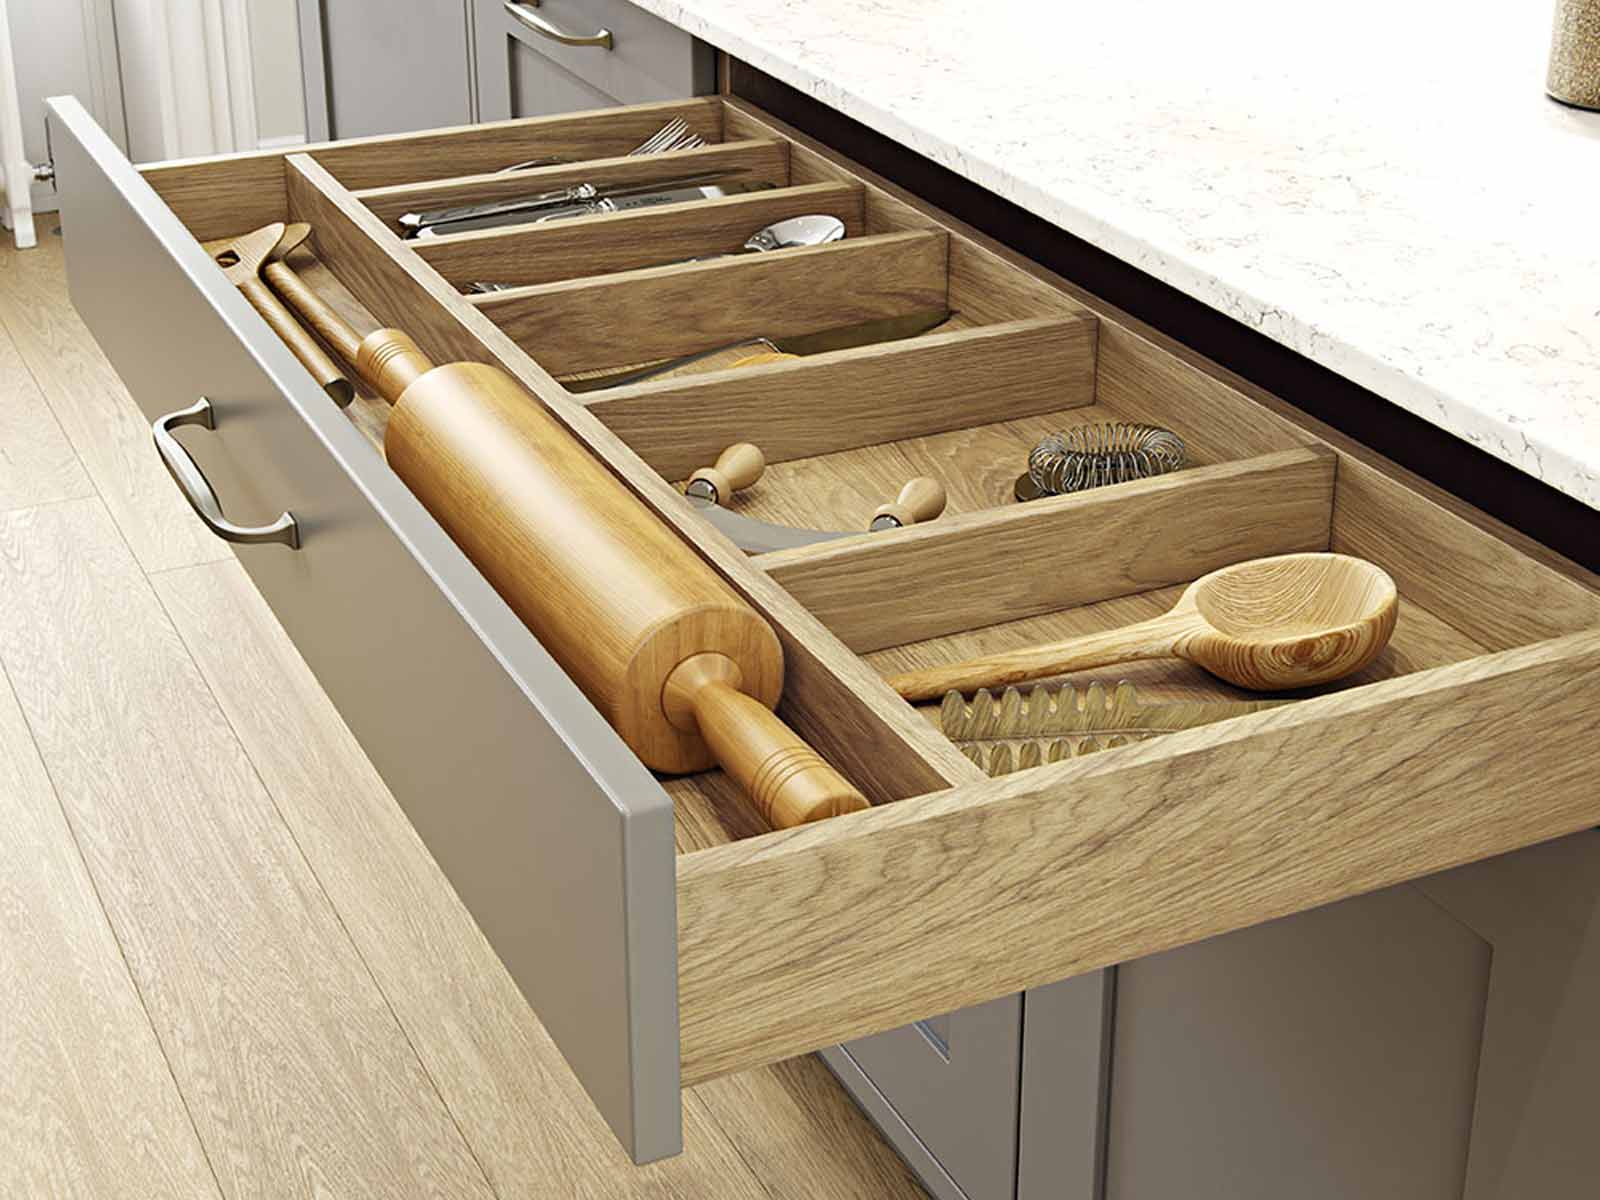 Wood kitchen drawer with cutlery drawer organiser in light Portland oak timber